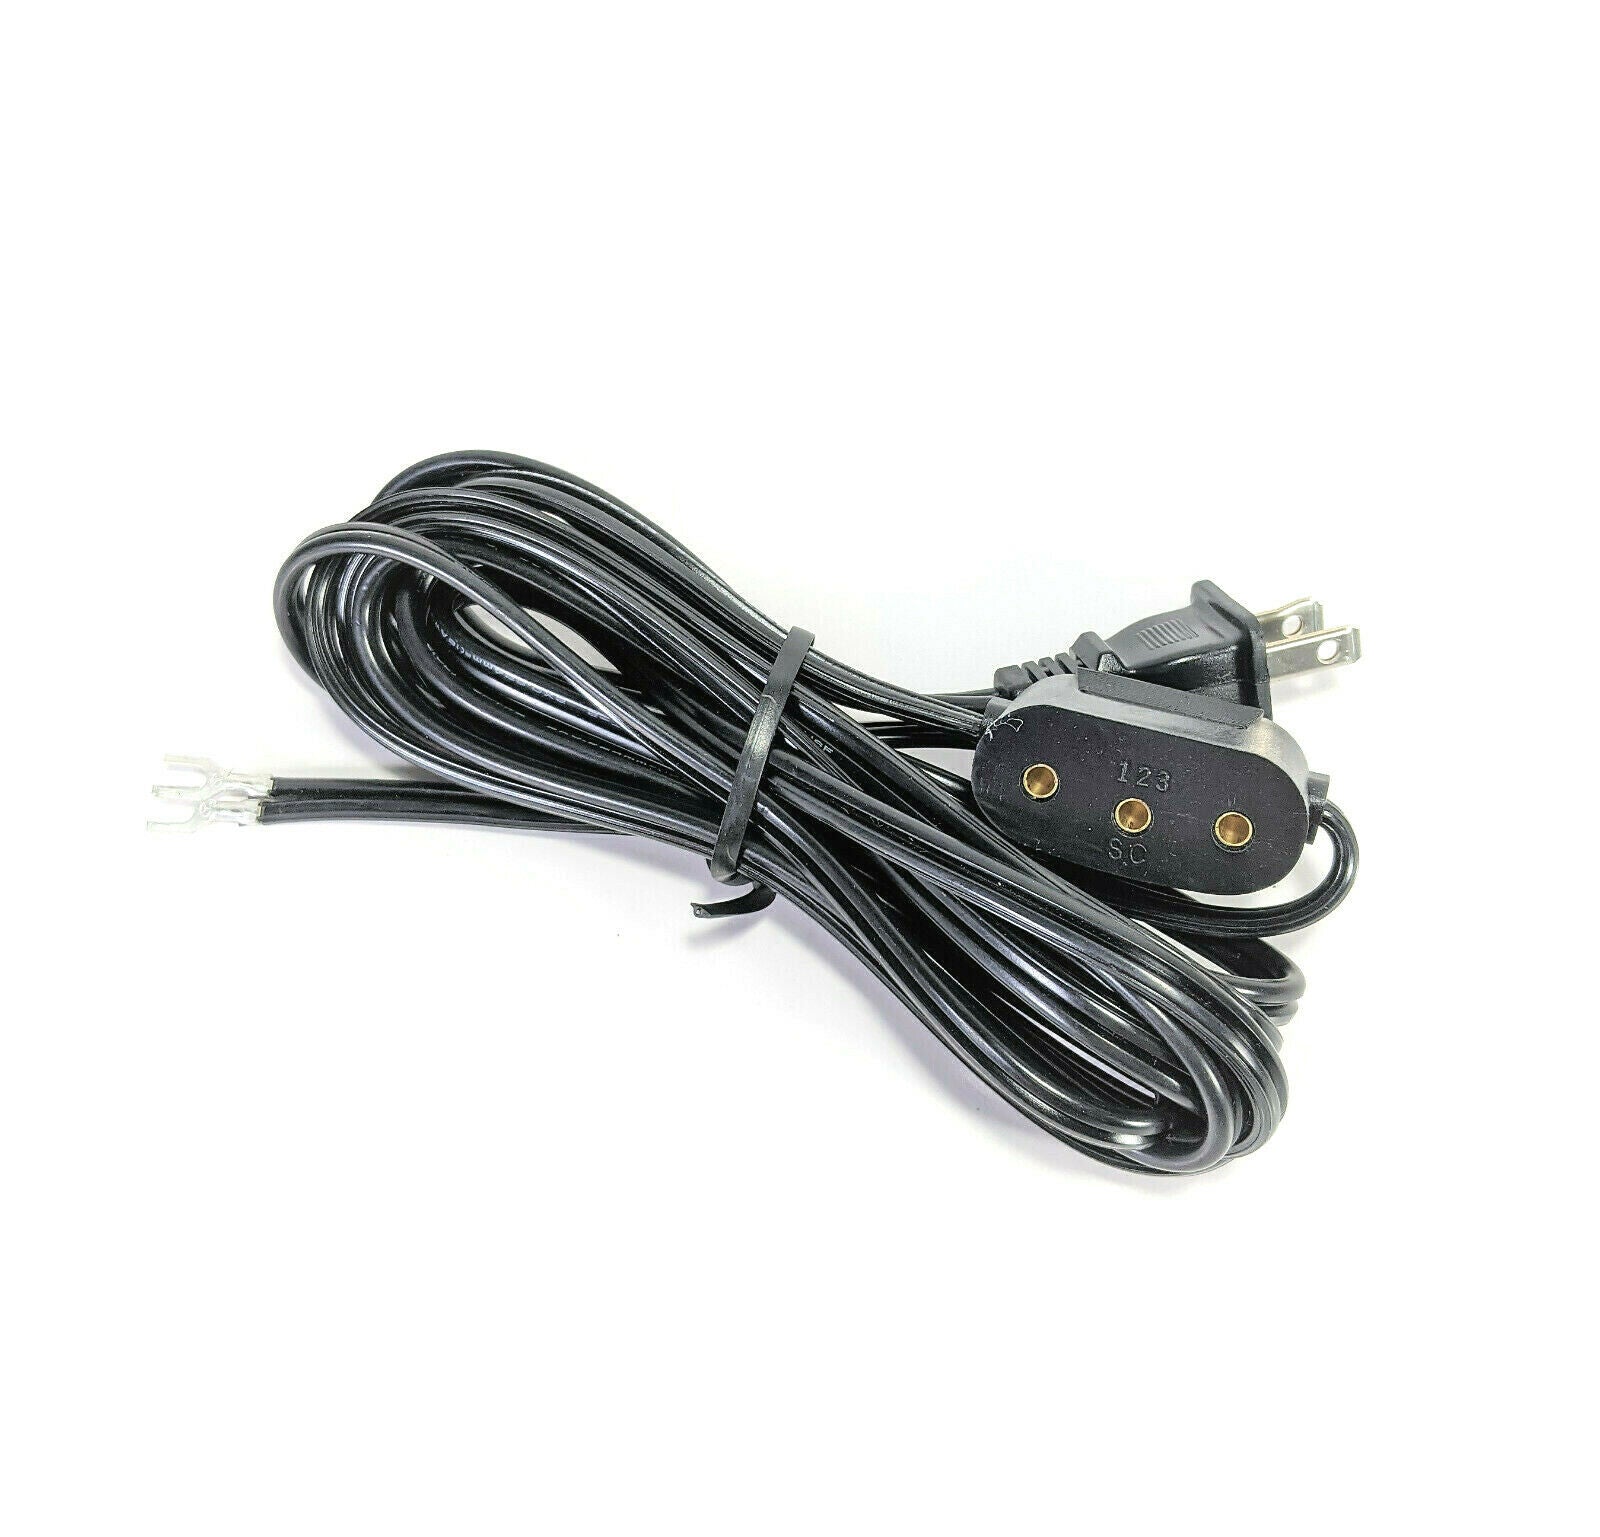 Foot Pedals and Power Cord  Machine Accessories (feet, needles